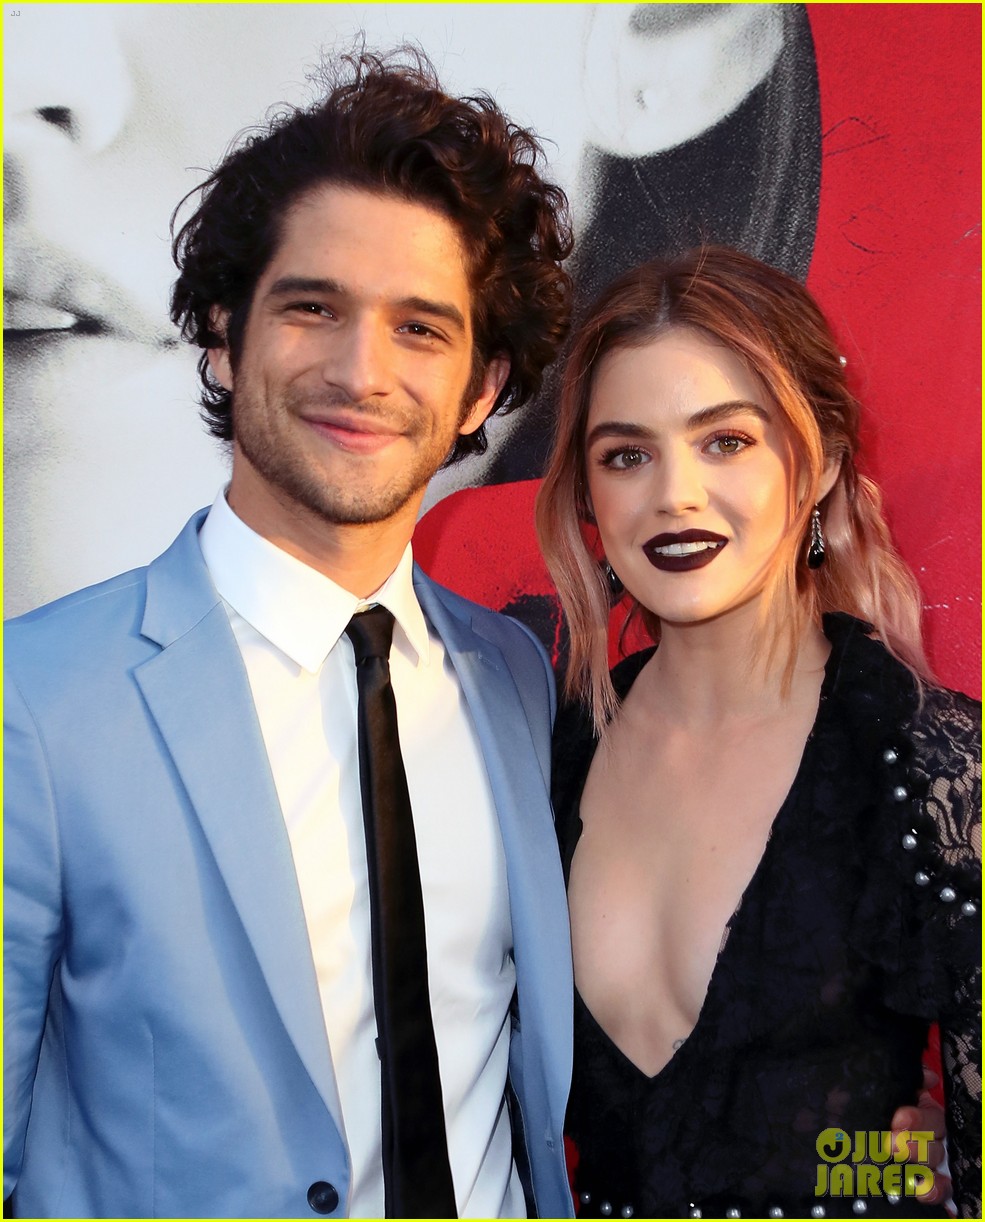 lucy hale tyler posey truth or dare premiere 07